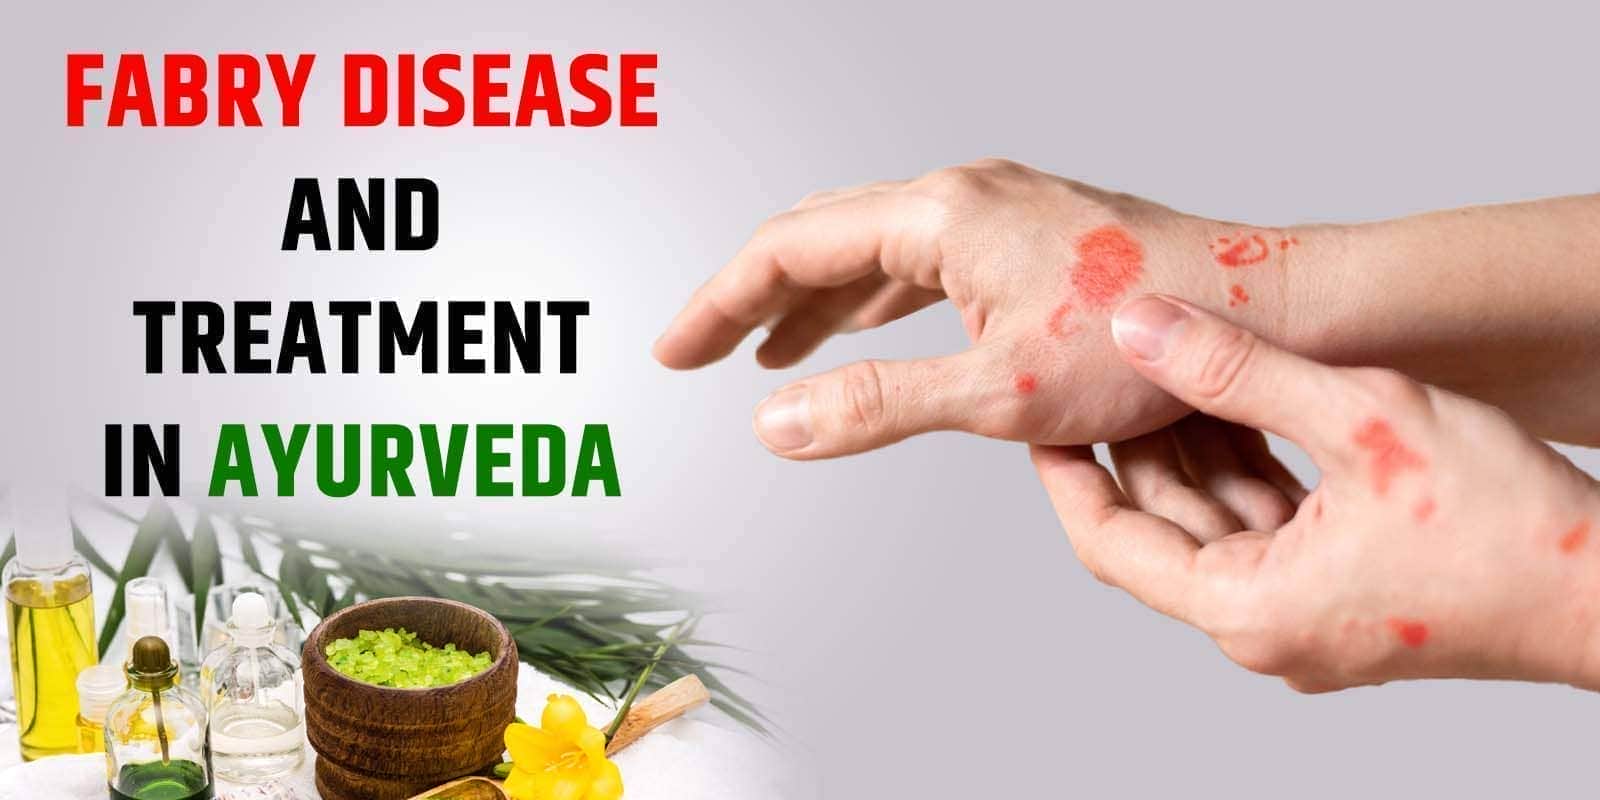 Fabry Disease and Treatment in Ayurveda